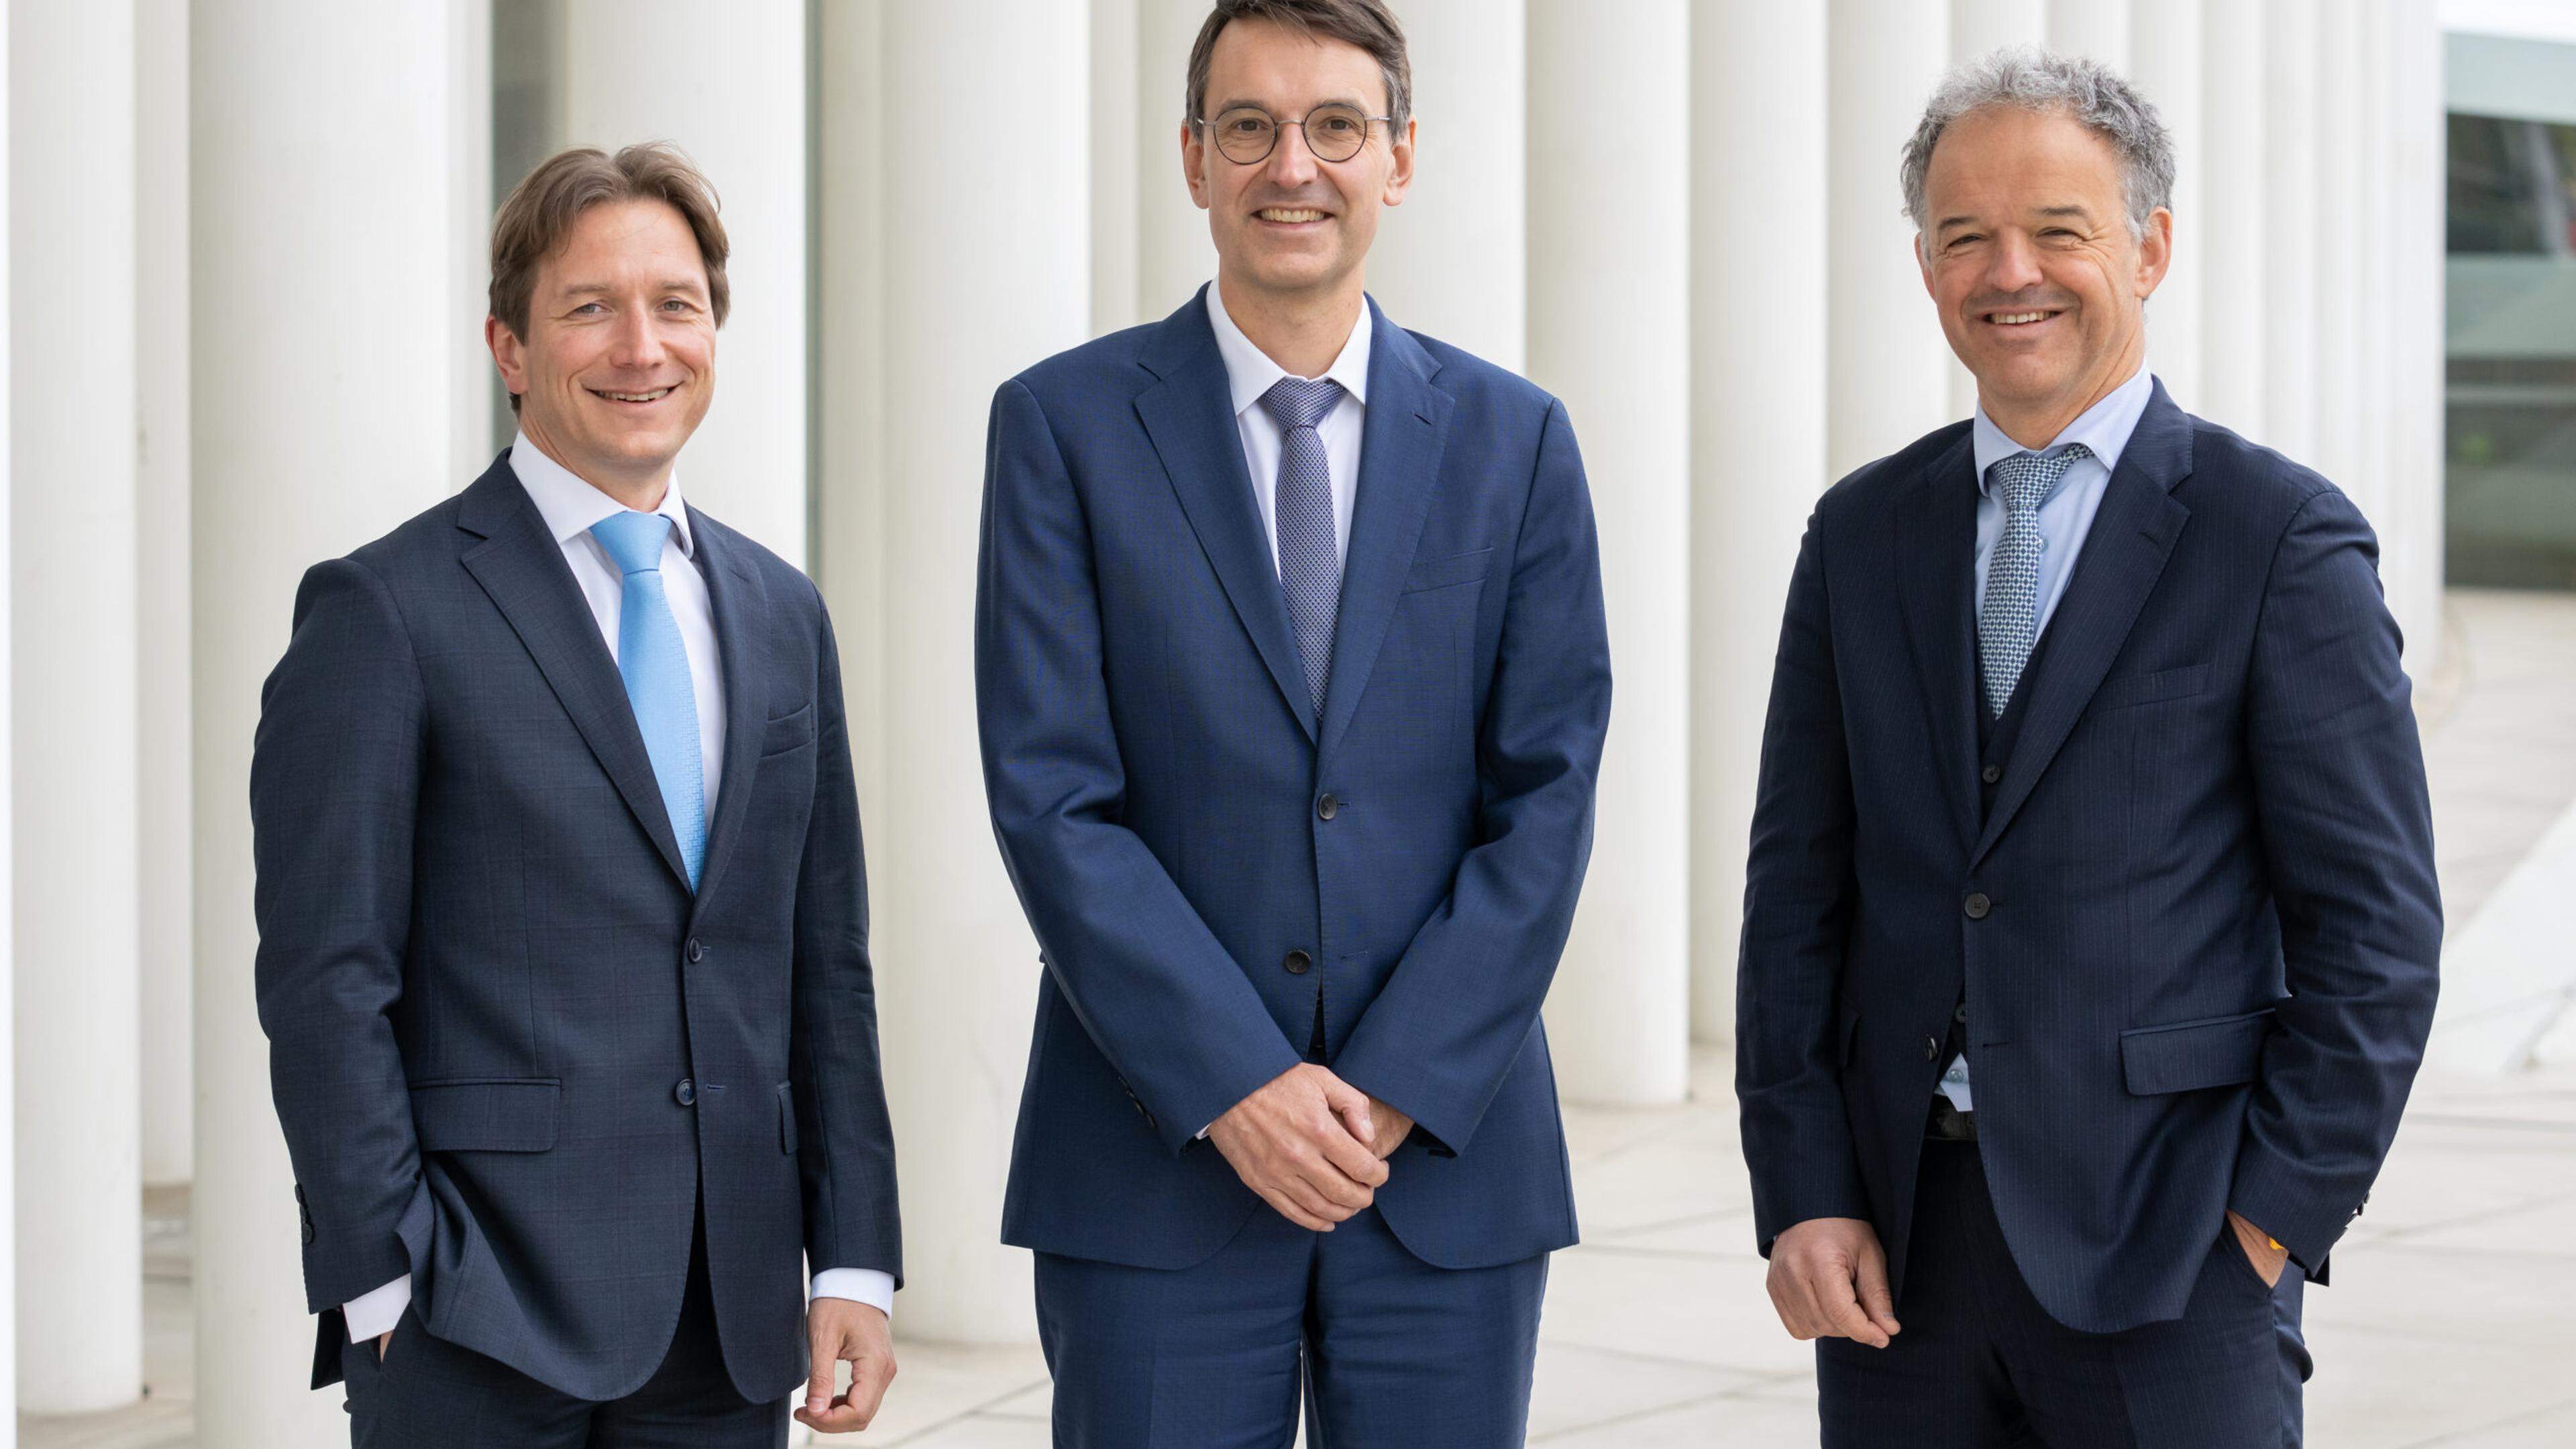 New UEL director Marc Wagener, centre, is flanked by outgoing director Jean-Paul Olinger (left) and UEL president Michel Reckinger (right)